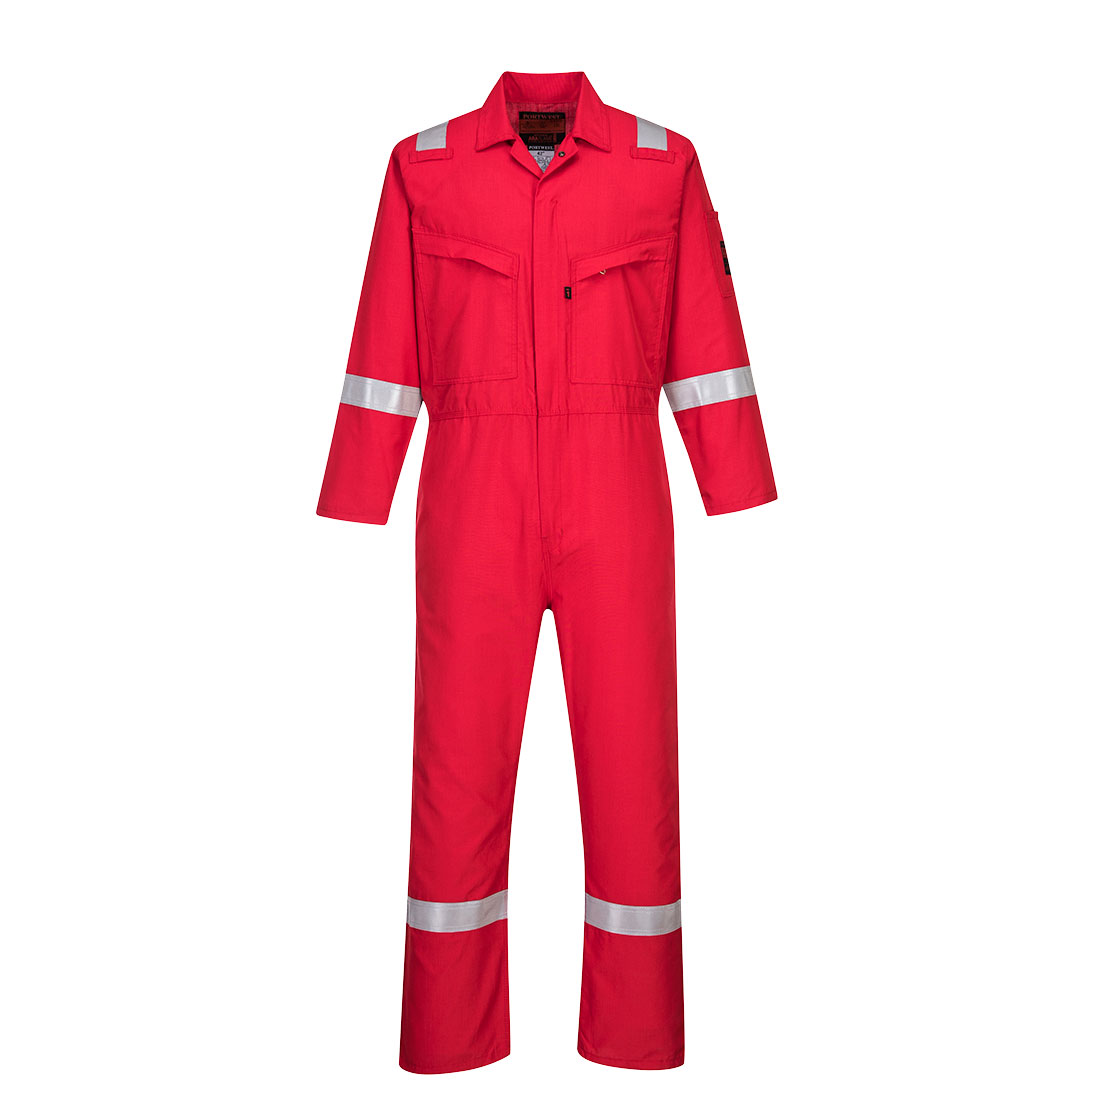 Best Soft and Breathable Silver Coverall